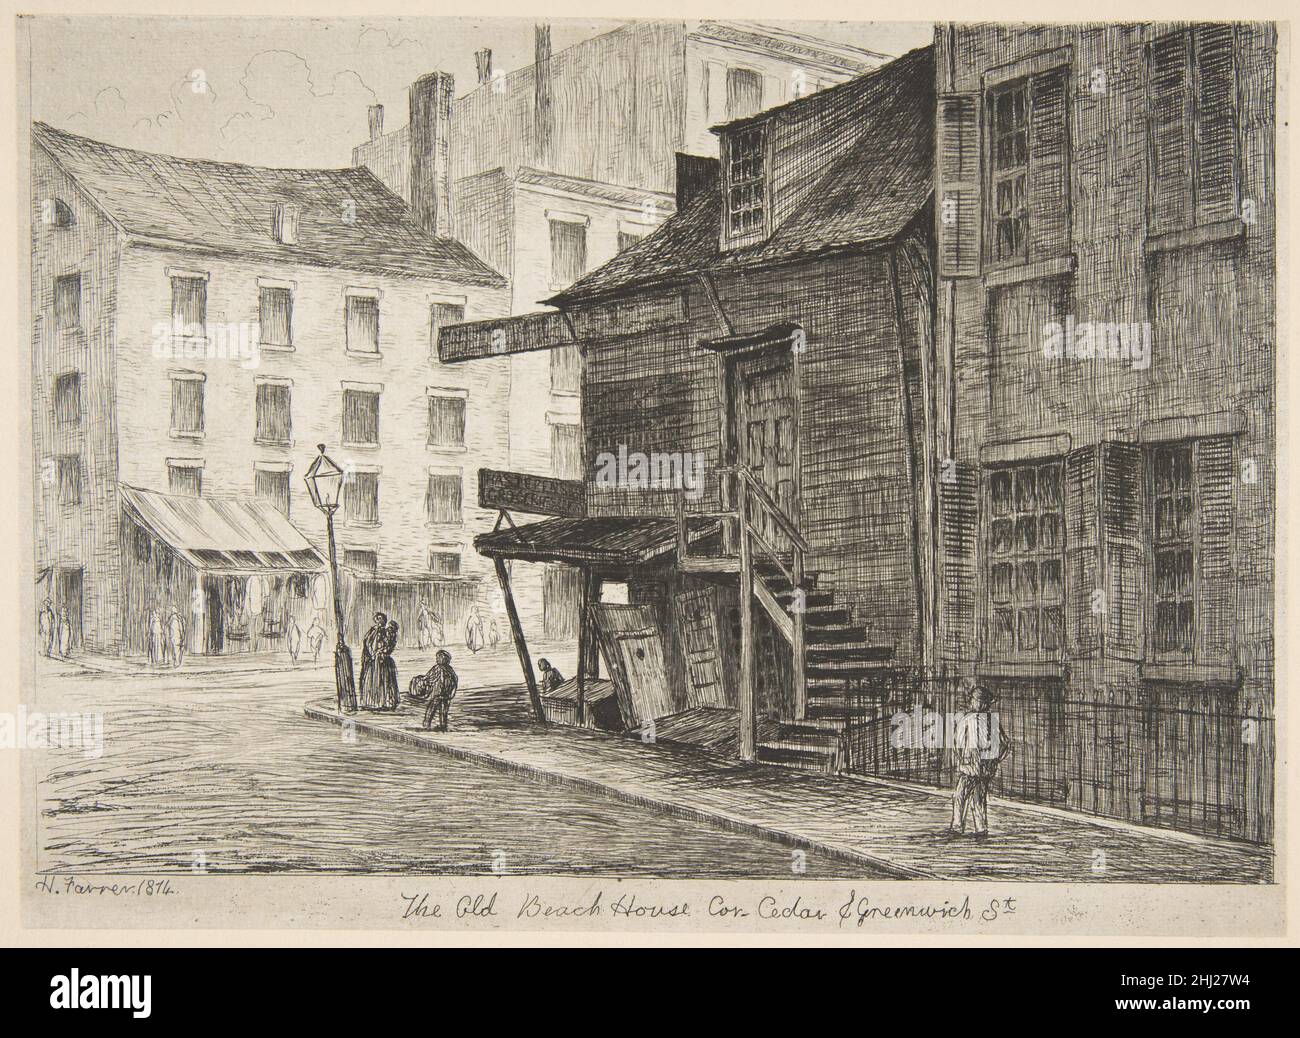 The Old Beach House, Corner of Cedar and Greenwich Streets (from Scenes of Old New York) 1874 Henry Farrer American. The Old Beach House, Corner of Cedar and Greenwich Streets (from Scenes of Old New York)  380989 Artist: Henry Farrer, American, London 1844?1903 New York, The Old Beach House, Corner of Cedar and Greenwich Streets (from Scenes of Old New York), 1874, Etching, cut within platemark, sheet: 5 3/8 x 7 1/2 in. (13.7 x 19 cm) mount: 7 5/16 x 10 3/16 in. (18.5 x 25.9 cm). The Metropolitan Museum of Art, New York. The Edward W. C. Arnold Collection of New York Prints, Maps and Pictures Stock Photo